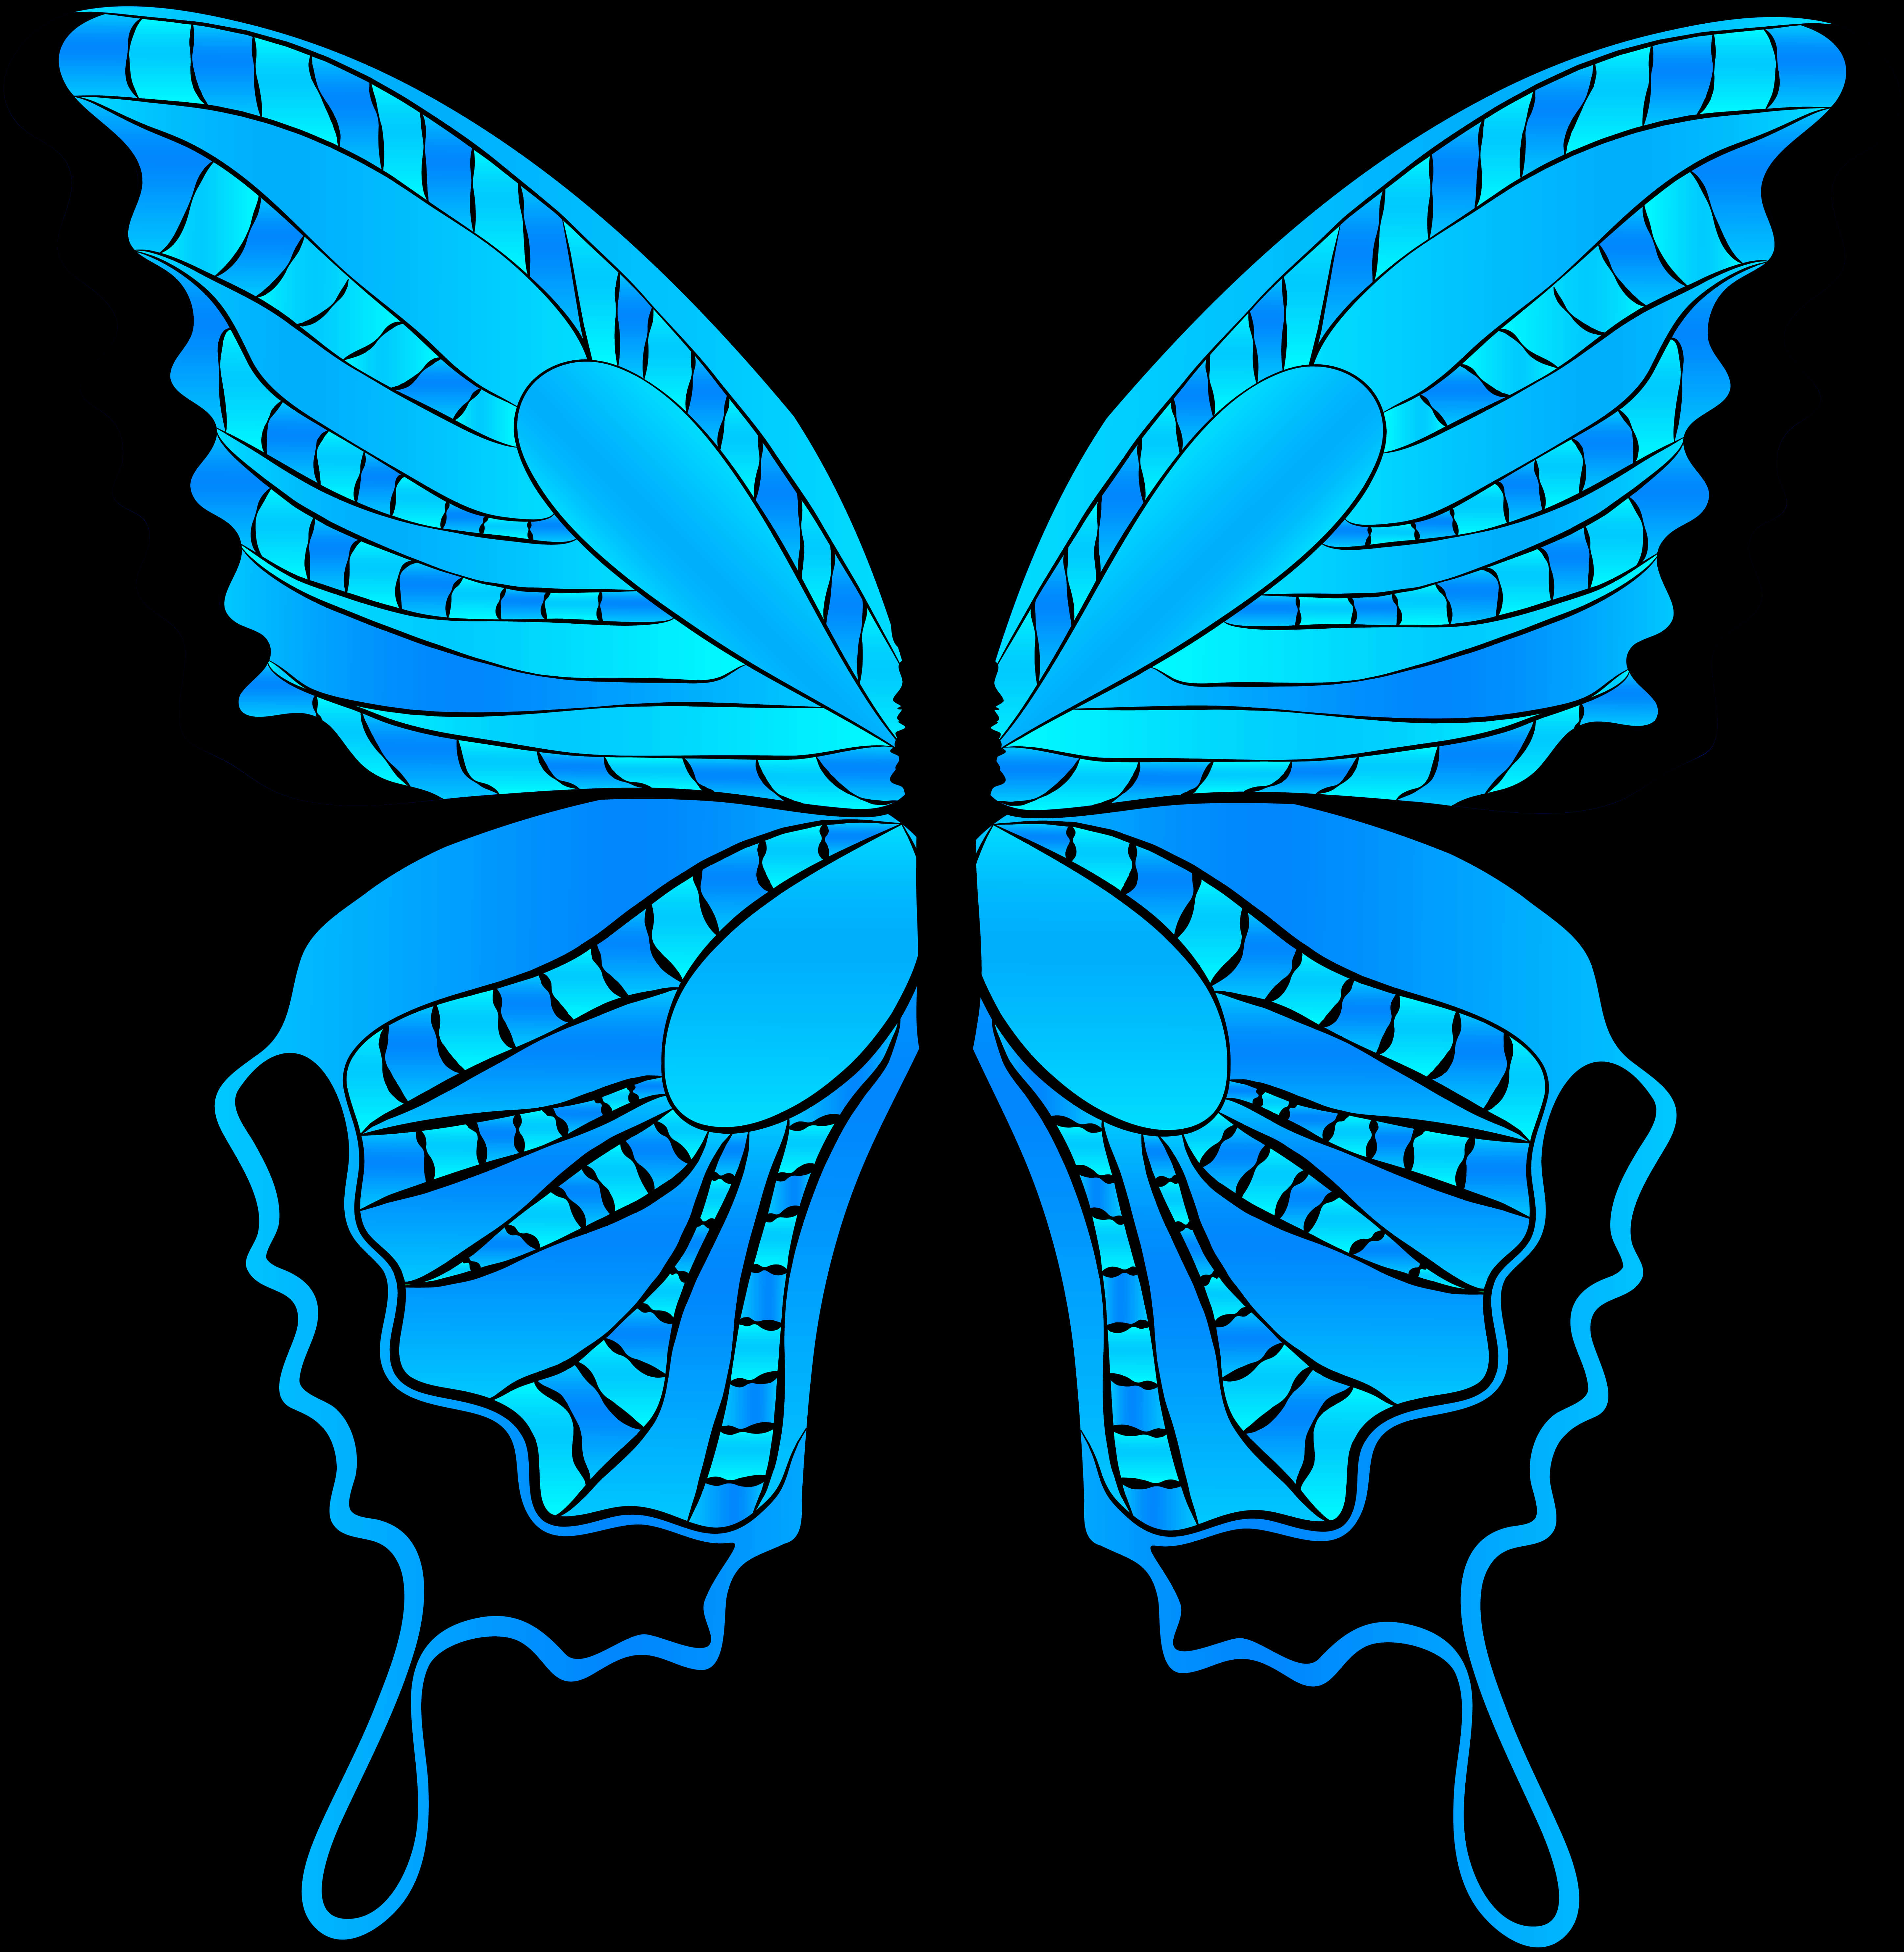 A Blue Butterfly Wings On A Black Background